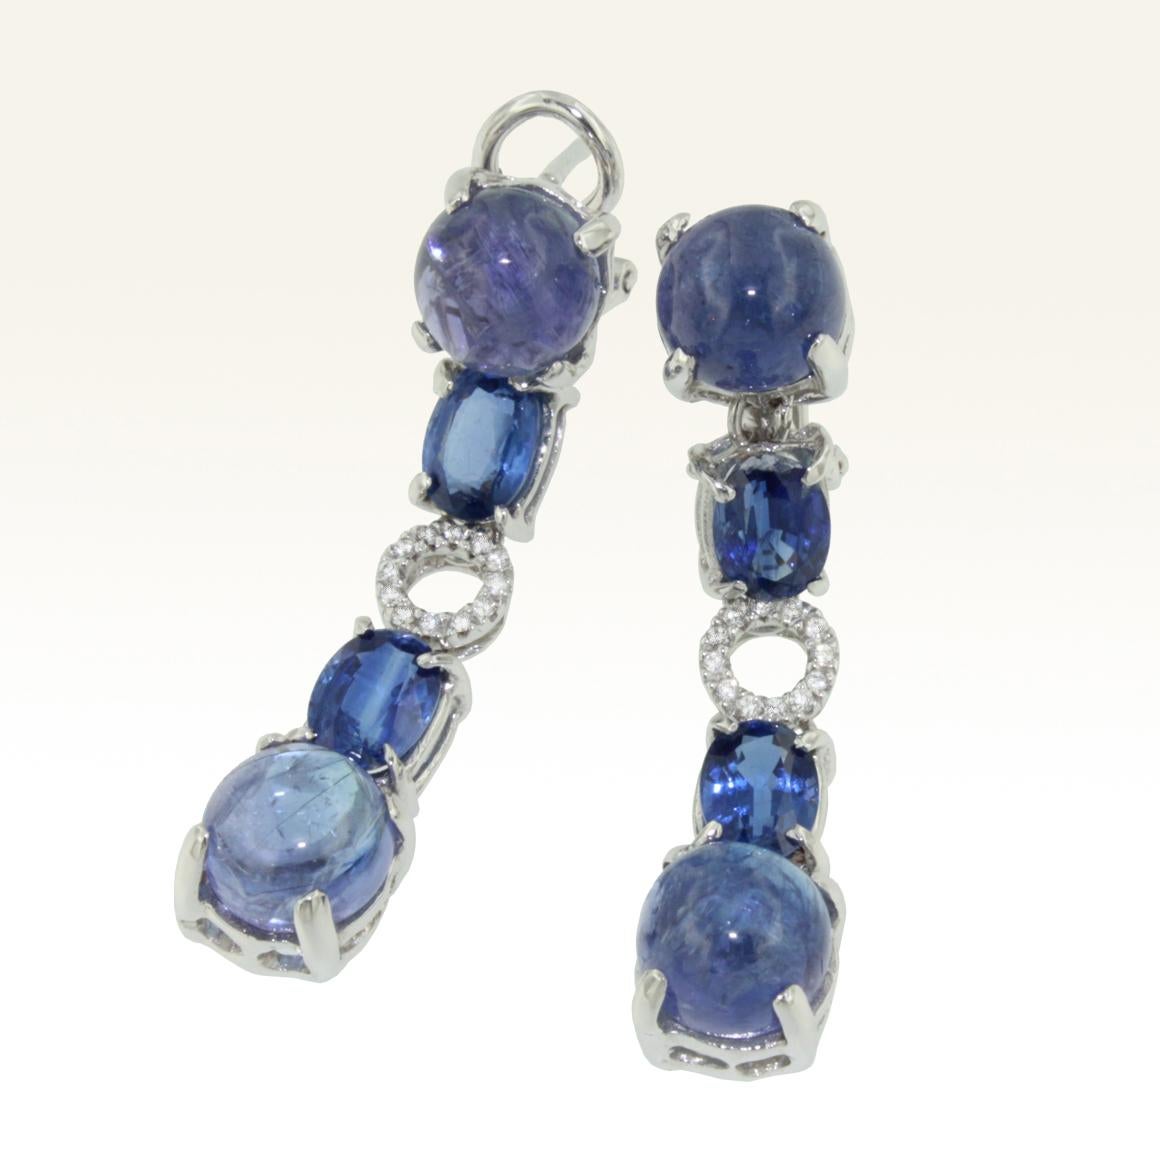 Modern, elegant earrings in white gold 18kt . Stones with an intense and bright blue color, they can be worn for any occasion or for special days. Hande made in Italy by Stanoppi Jewellery since 1948.

 Lenght of earrings: cm4.0 cts diamonds 0.20